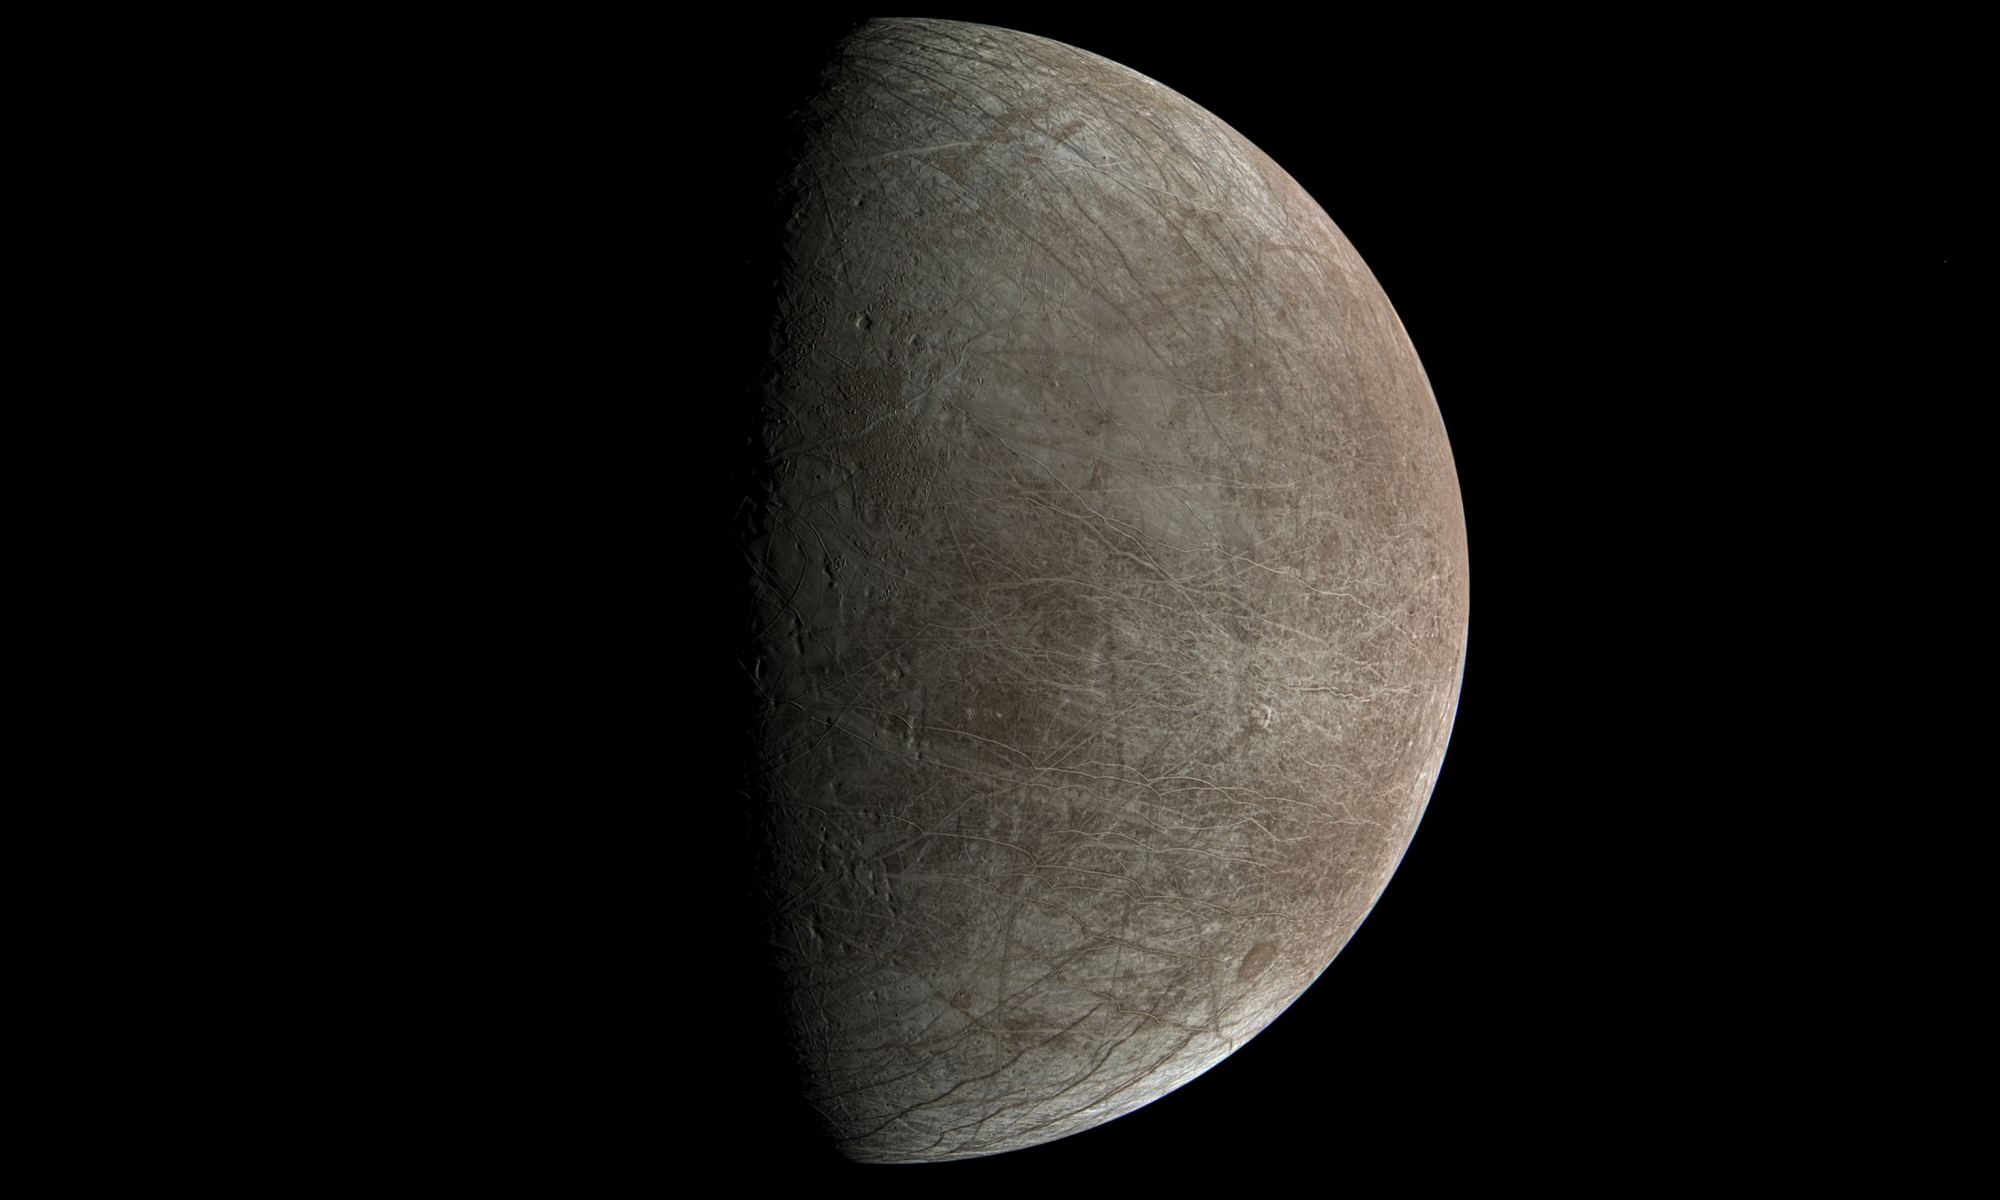 The moon Europa, as photographed by the Juno probe last year. Credit: NASA / JPL-Caltech / SwRI / MSSS